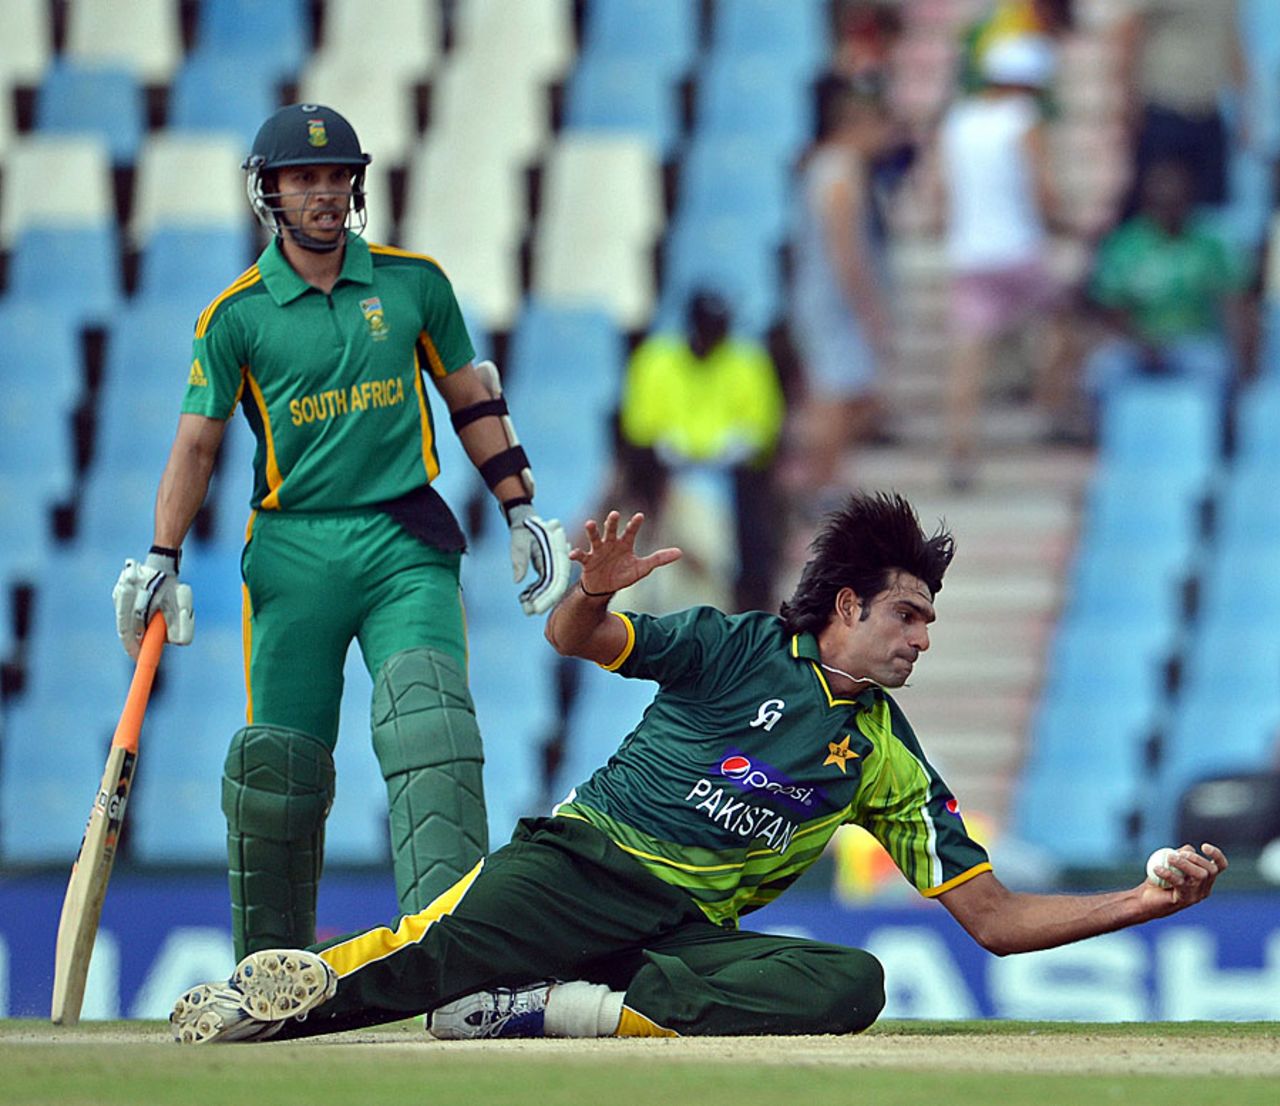 Mohammad Irfan plucks a catch one-handed off his own bowling, South Africa v Pakistan, 2nd ODI, Centurion, March 15, 2013